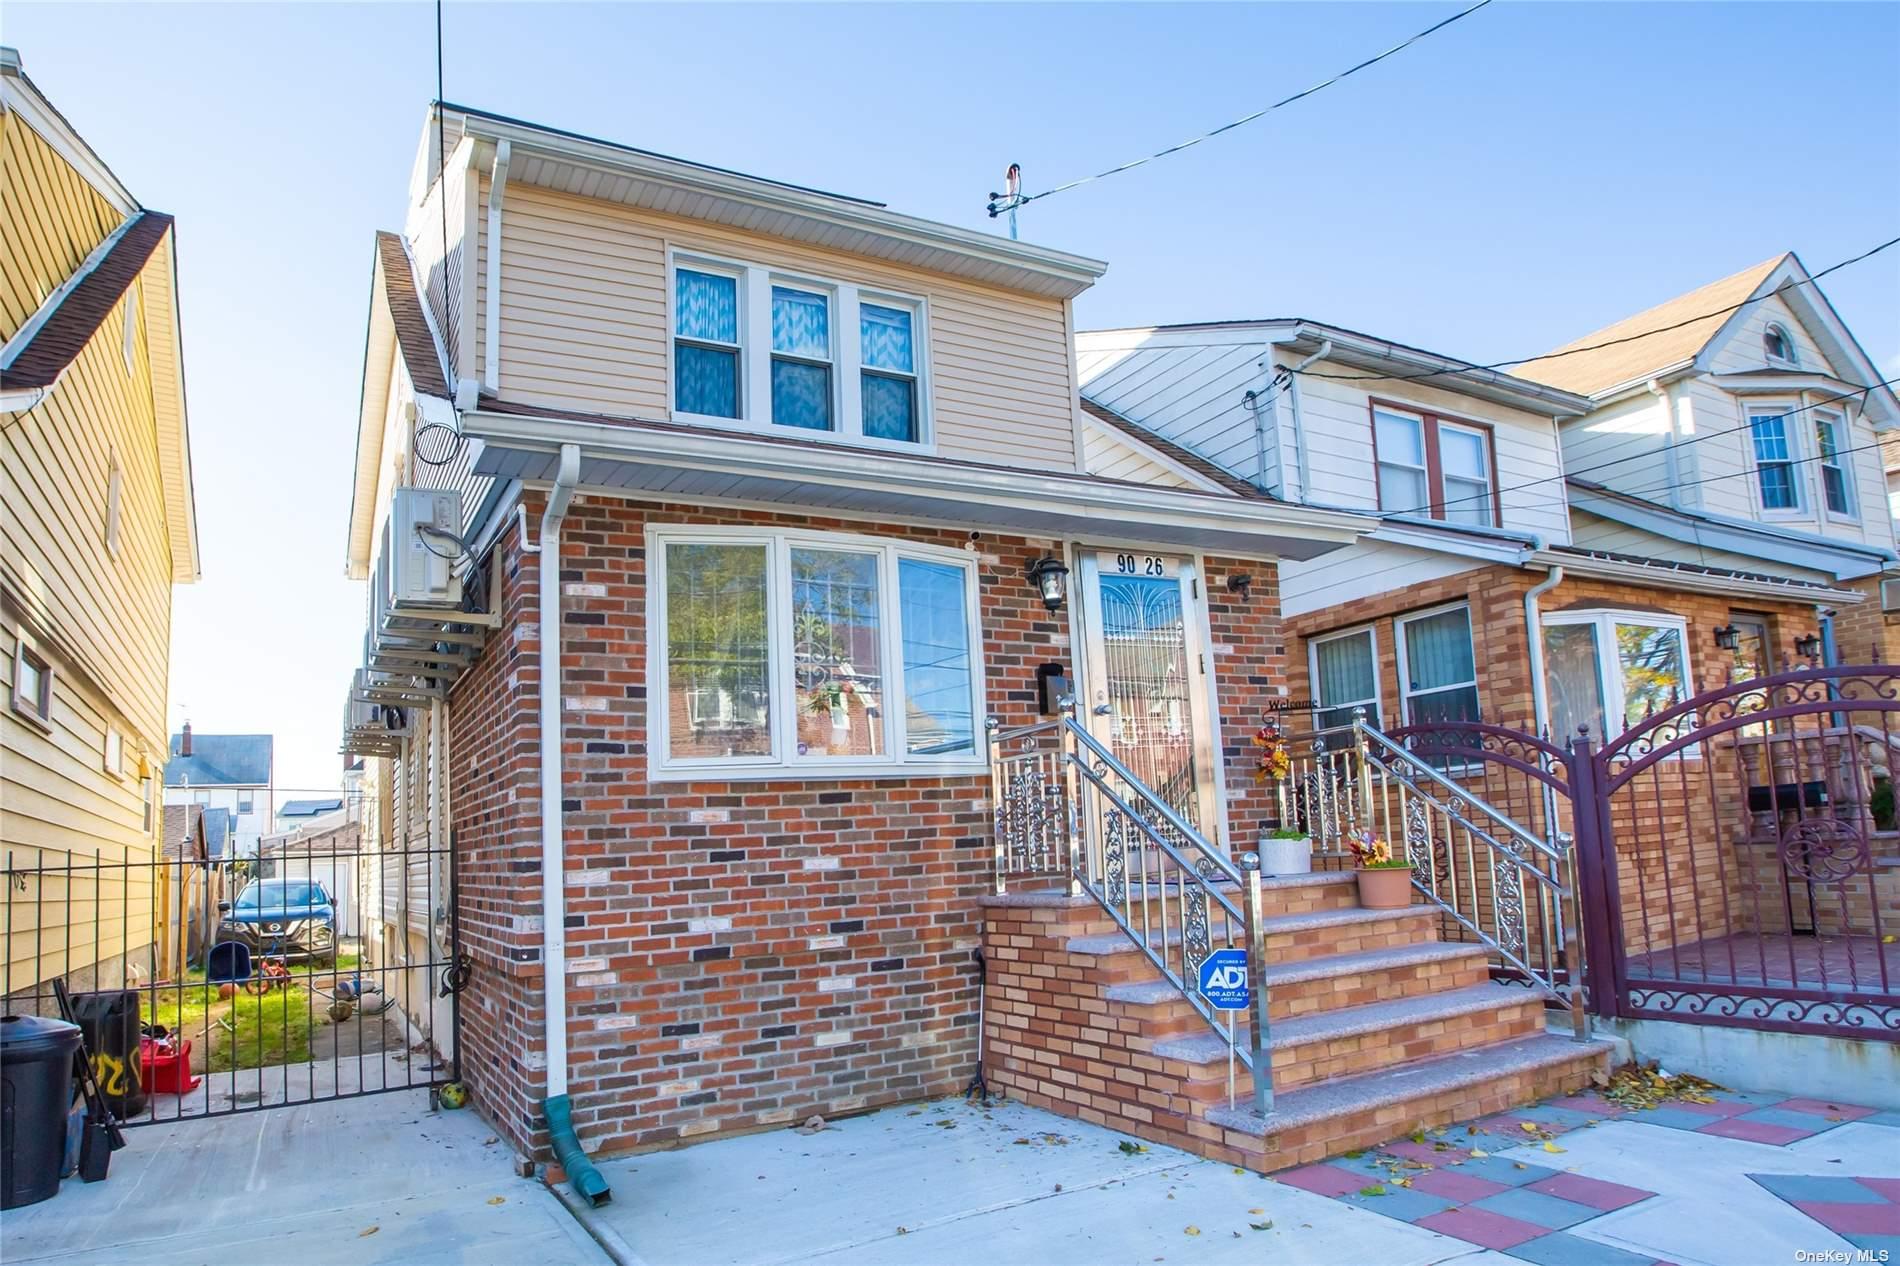 90-26 198th Street in Queens, Jamaica, NY 11423